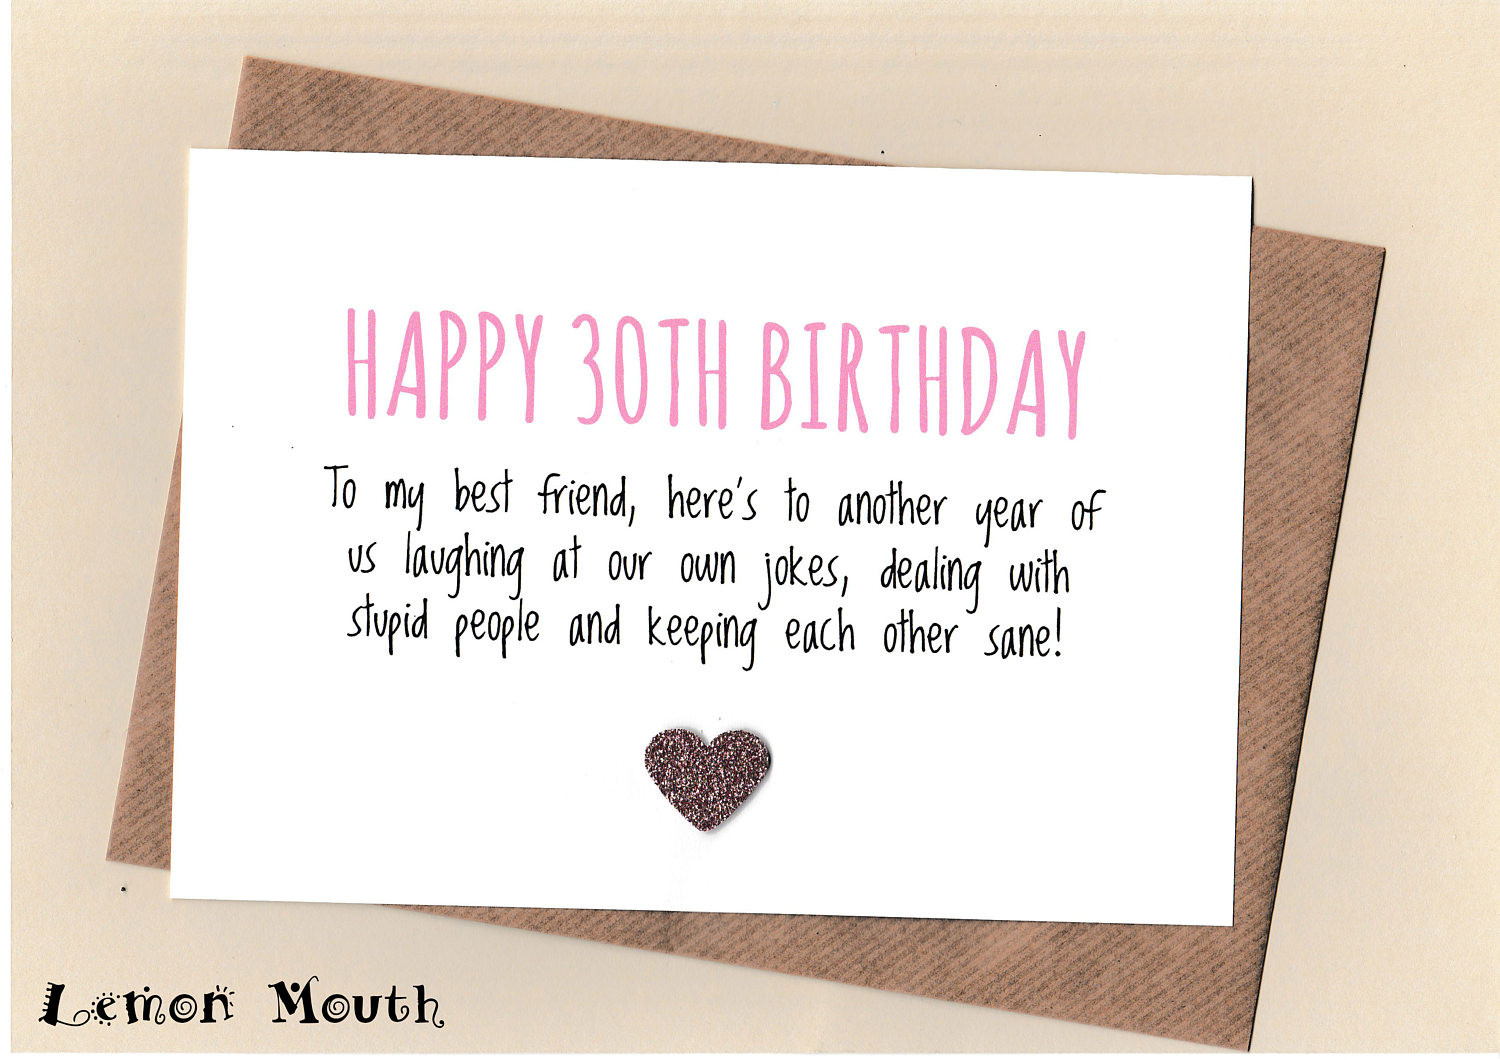 22 Of the Best Ideas for 30th Birthday Card Messages - Home, Family ...